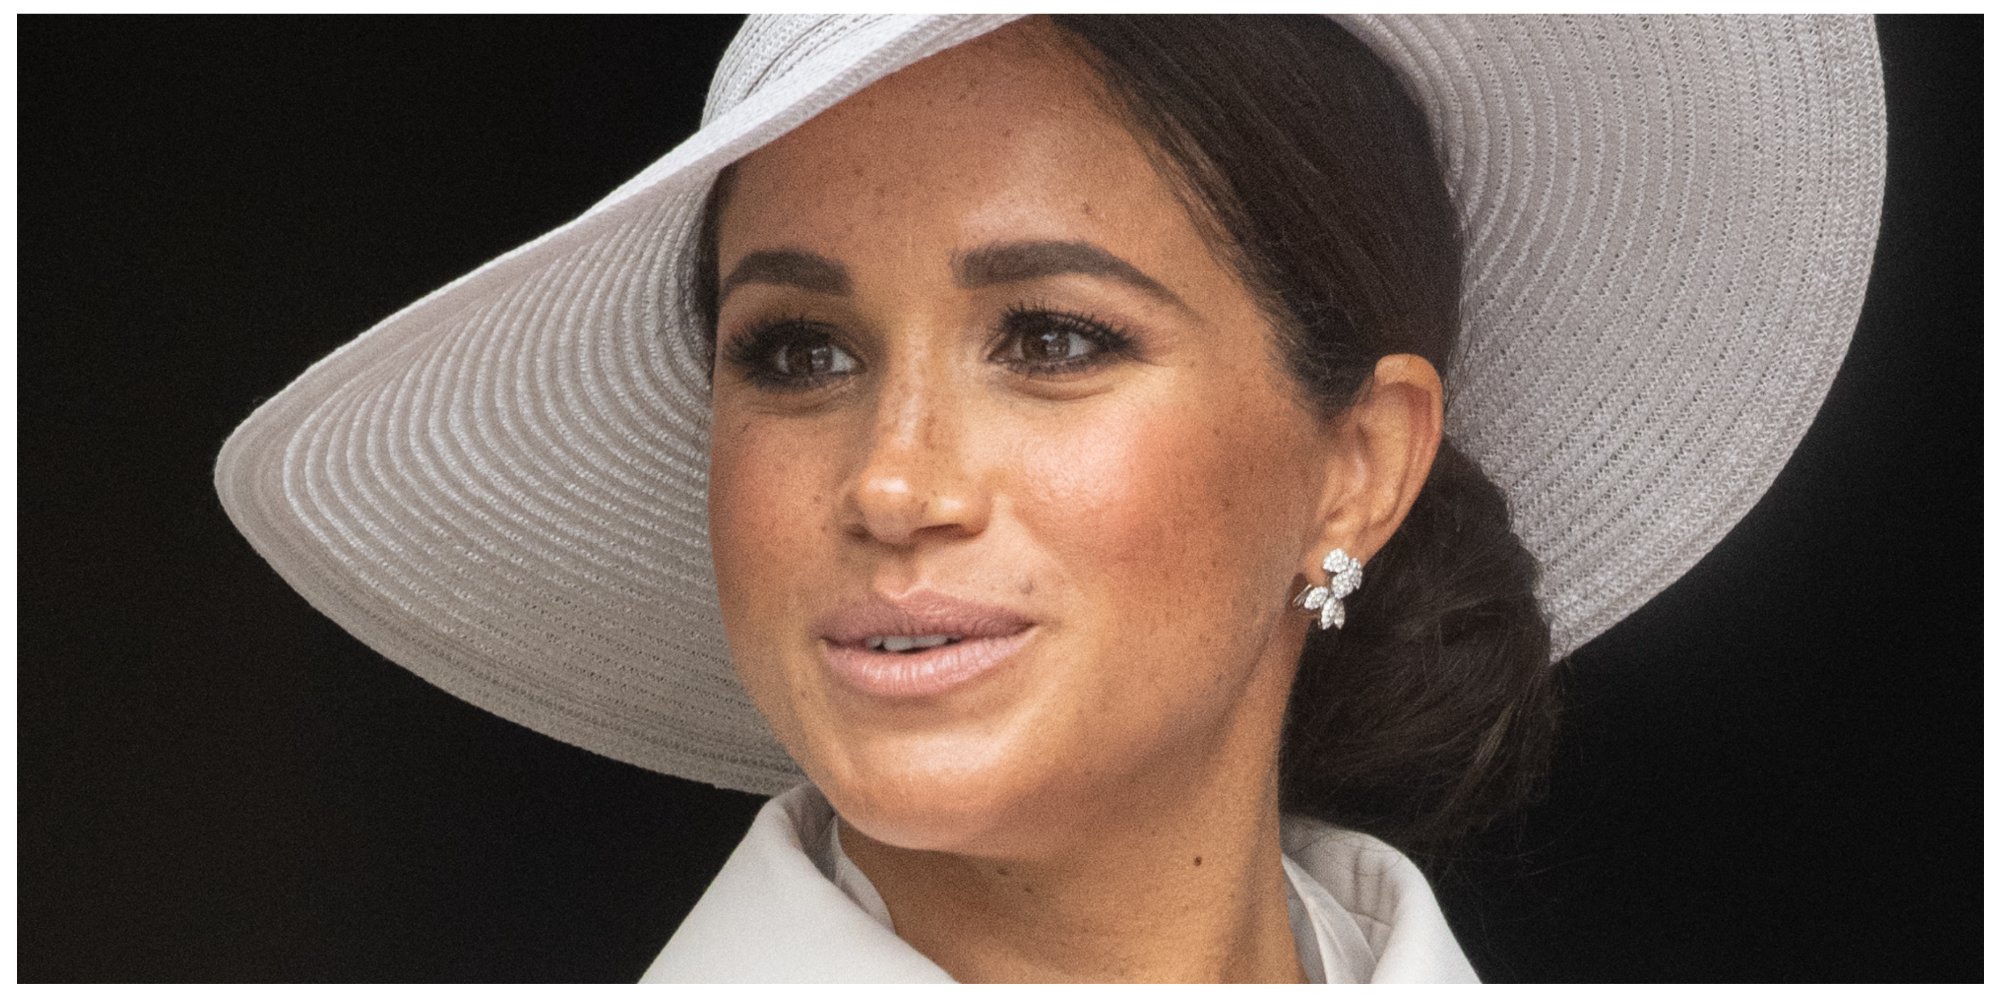 Meghan Markle wears a white hat and suit to a royal event in June 2023.